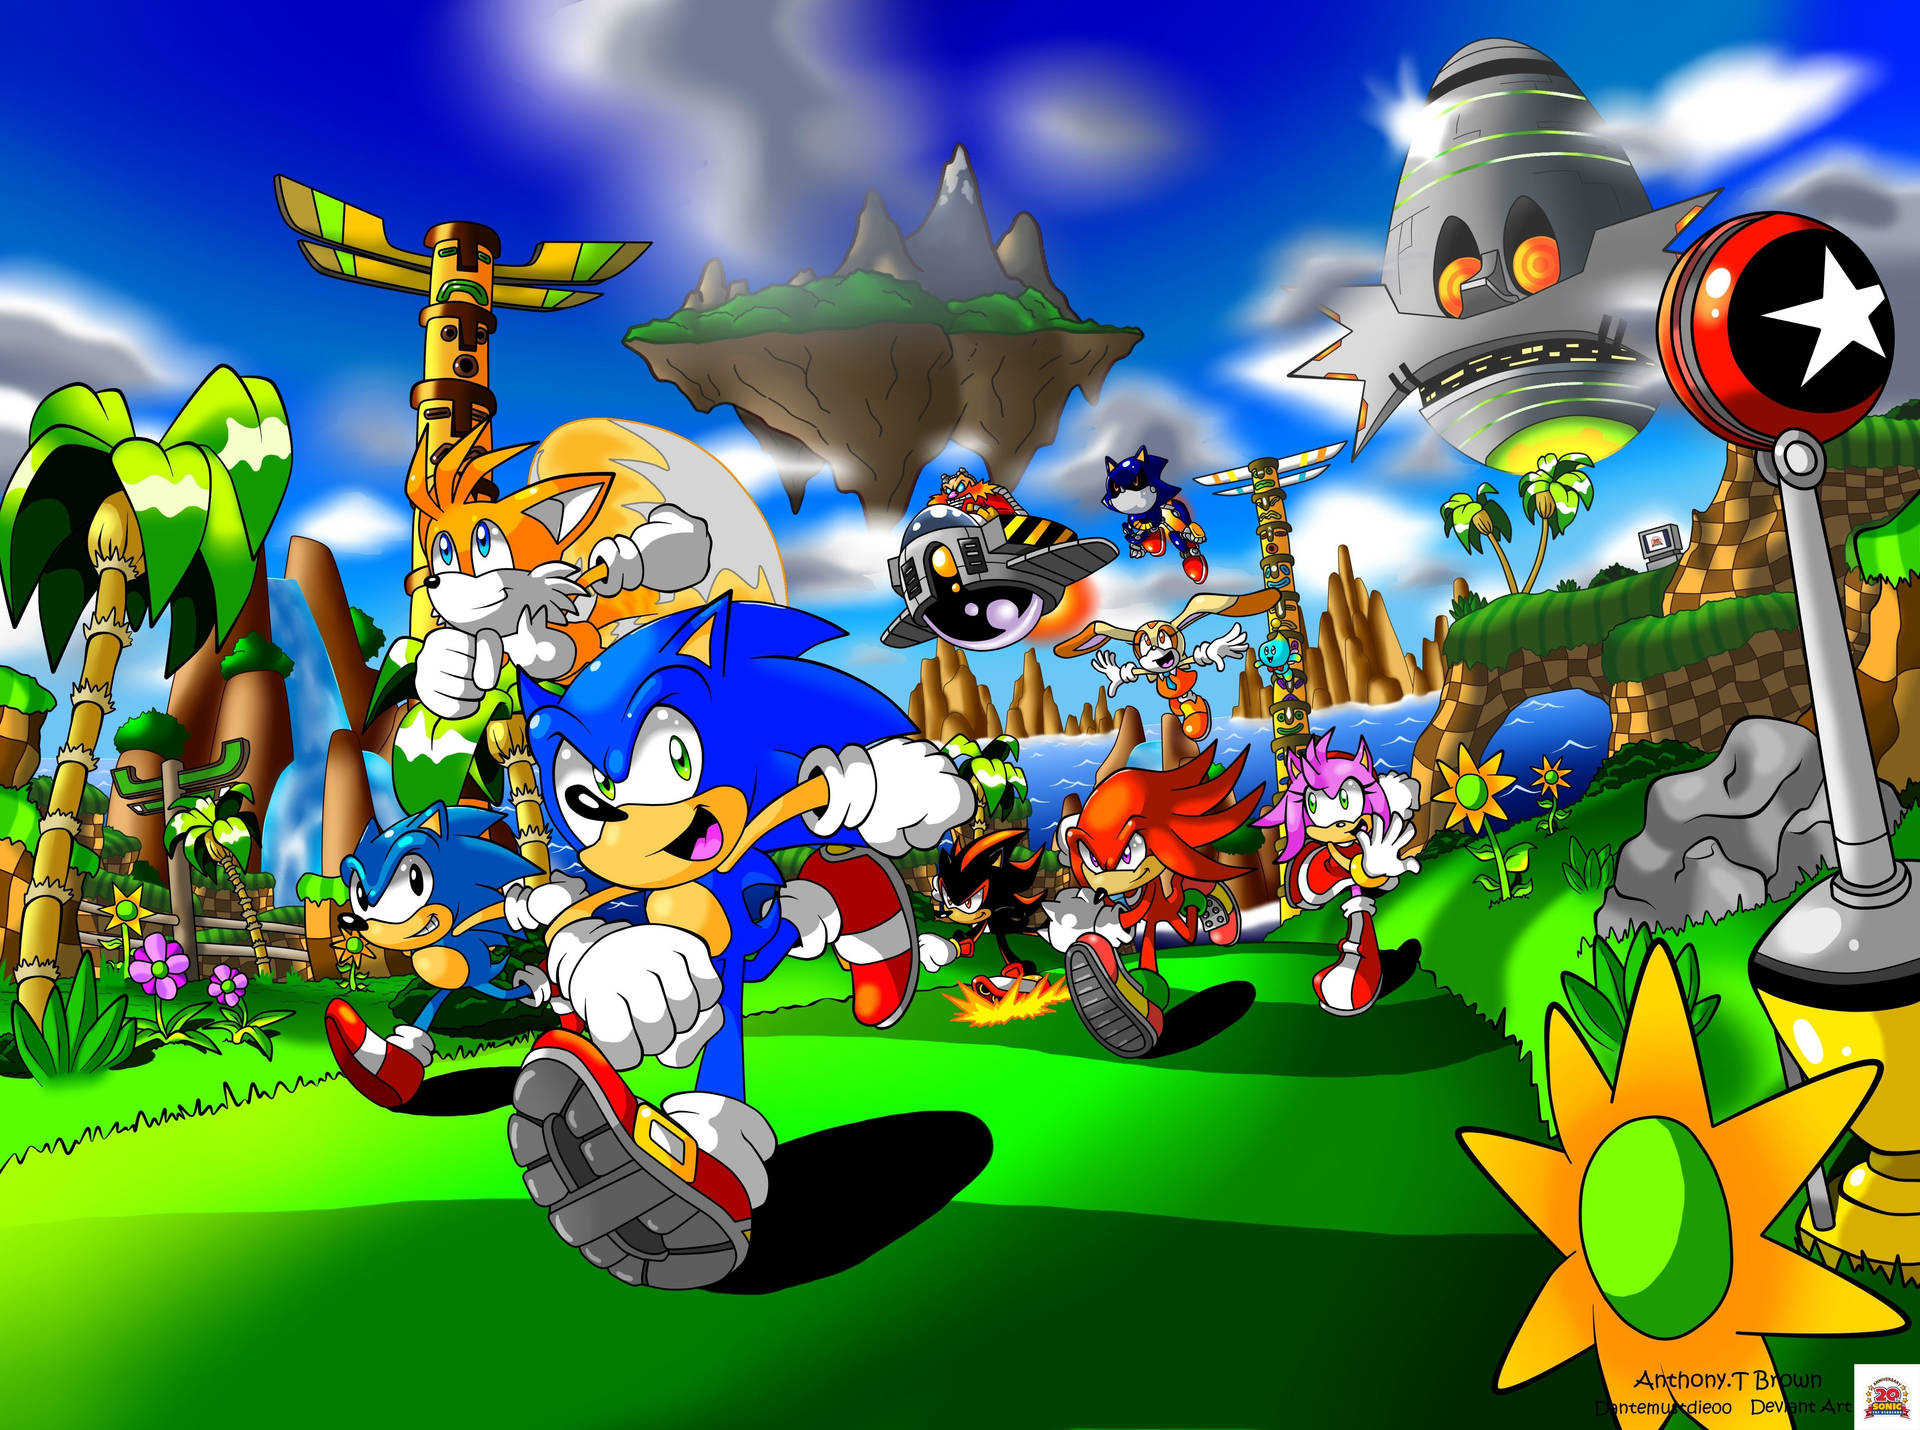 Sonic the Hedgehog sprinting through the beautiful tropical Jungle Wallpaper